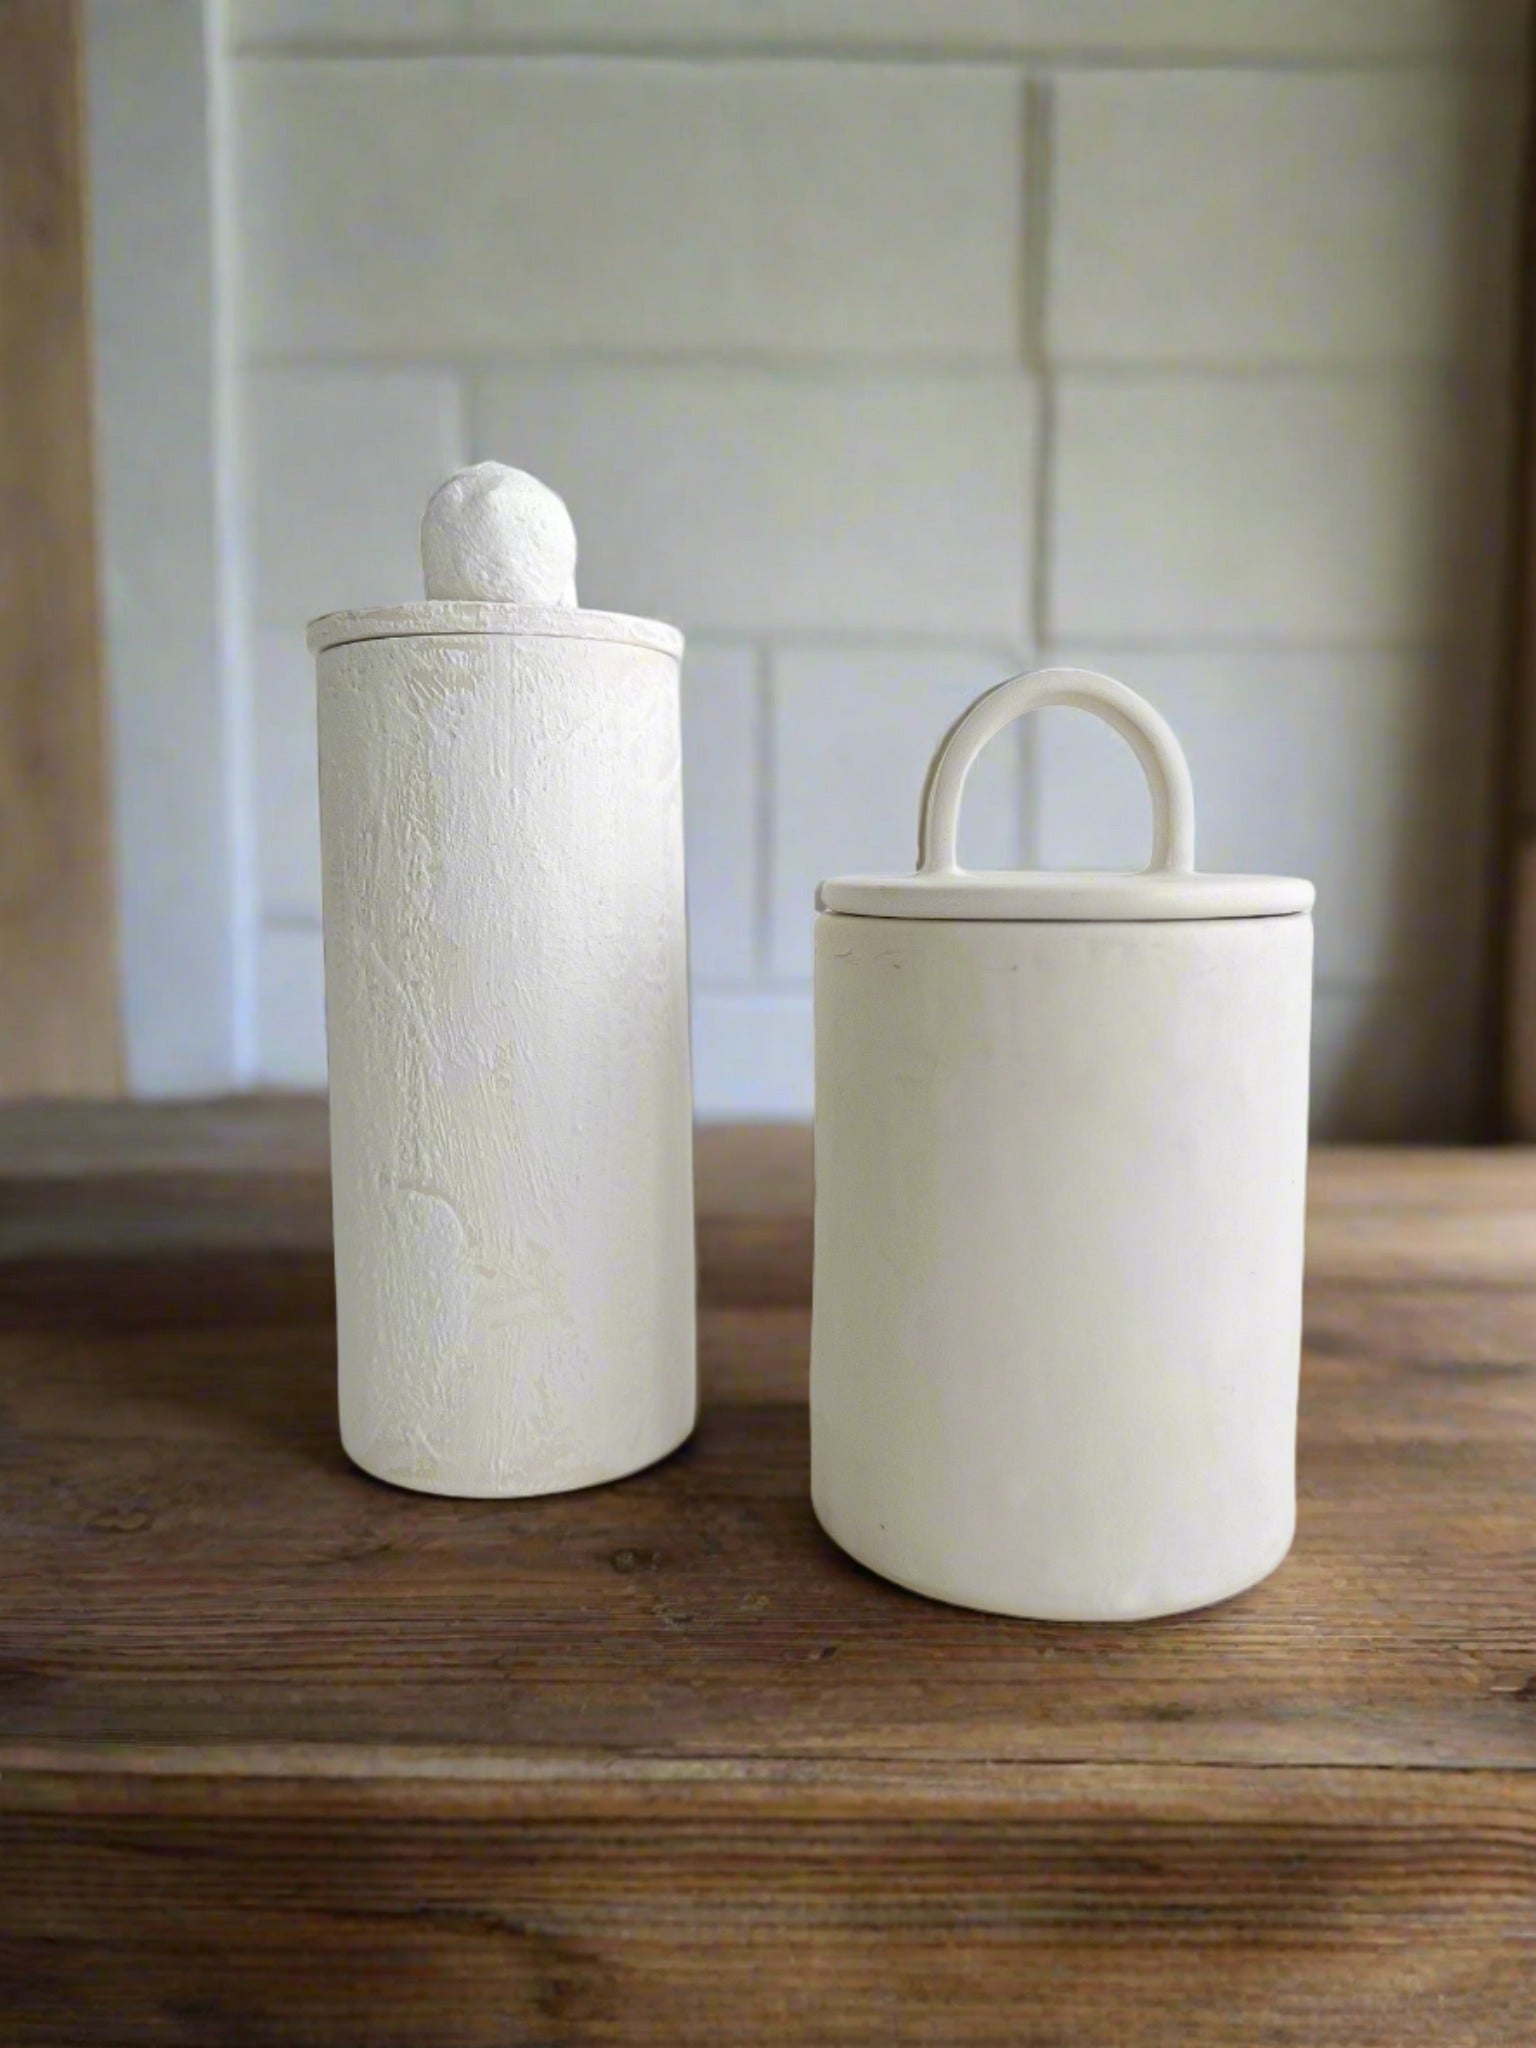 High-quality ceramic kitchen canisters with unique design